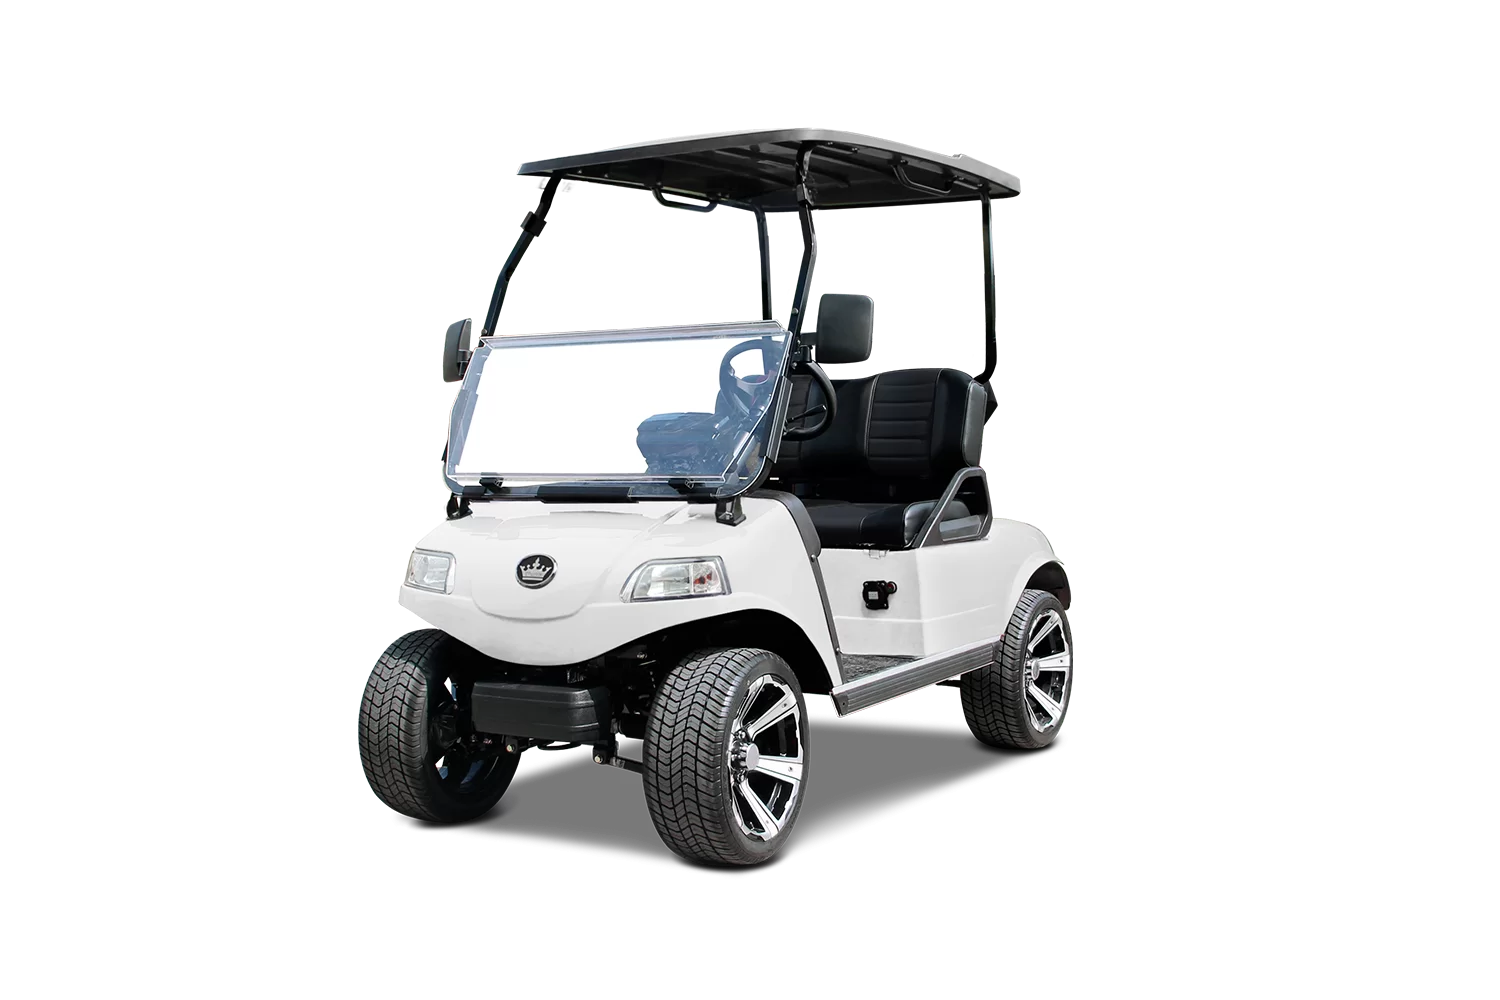 Explore the Benefits of Owning a Golf Cart Today